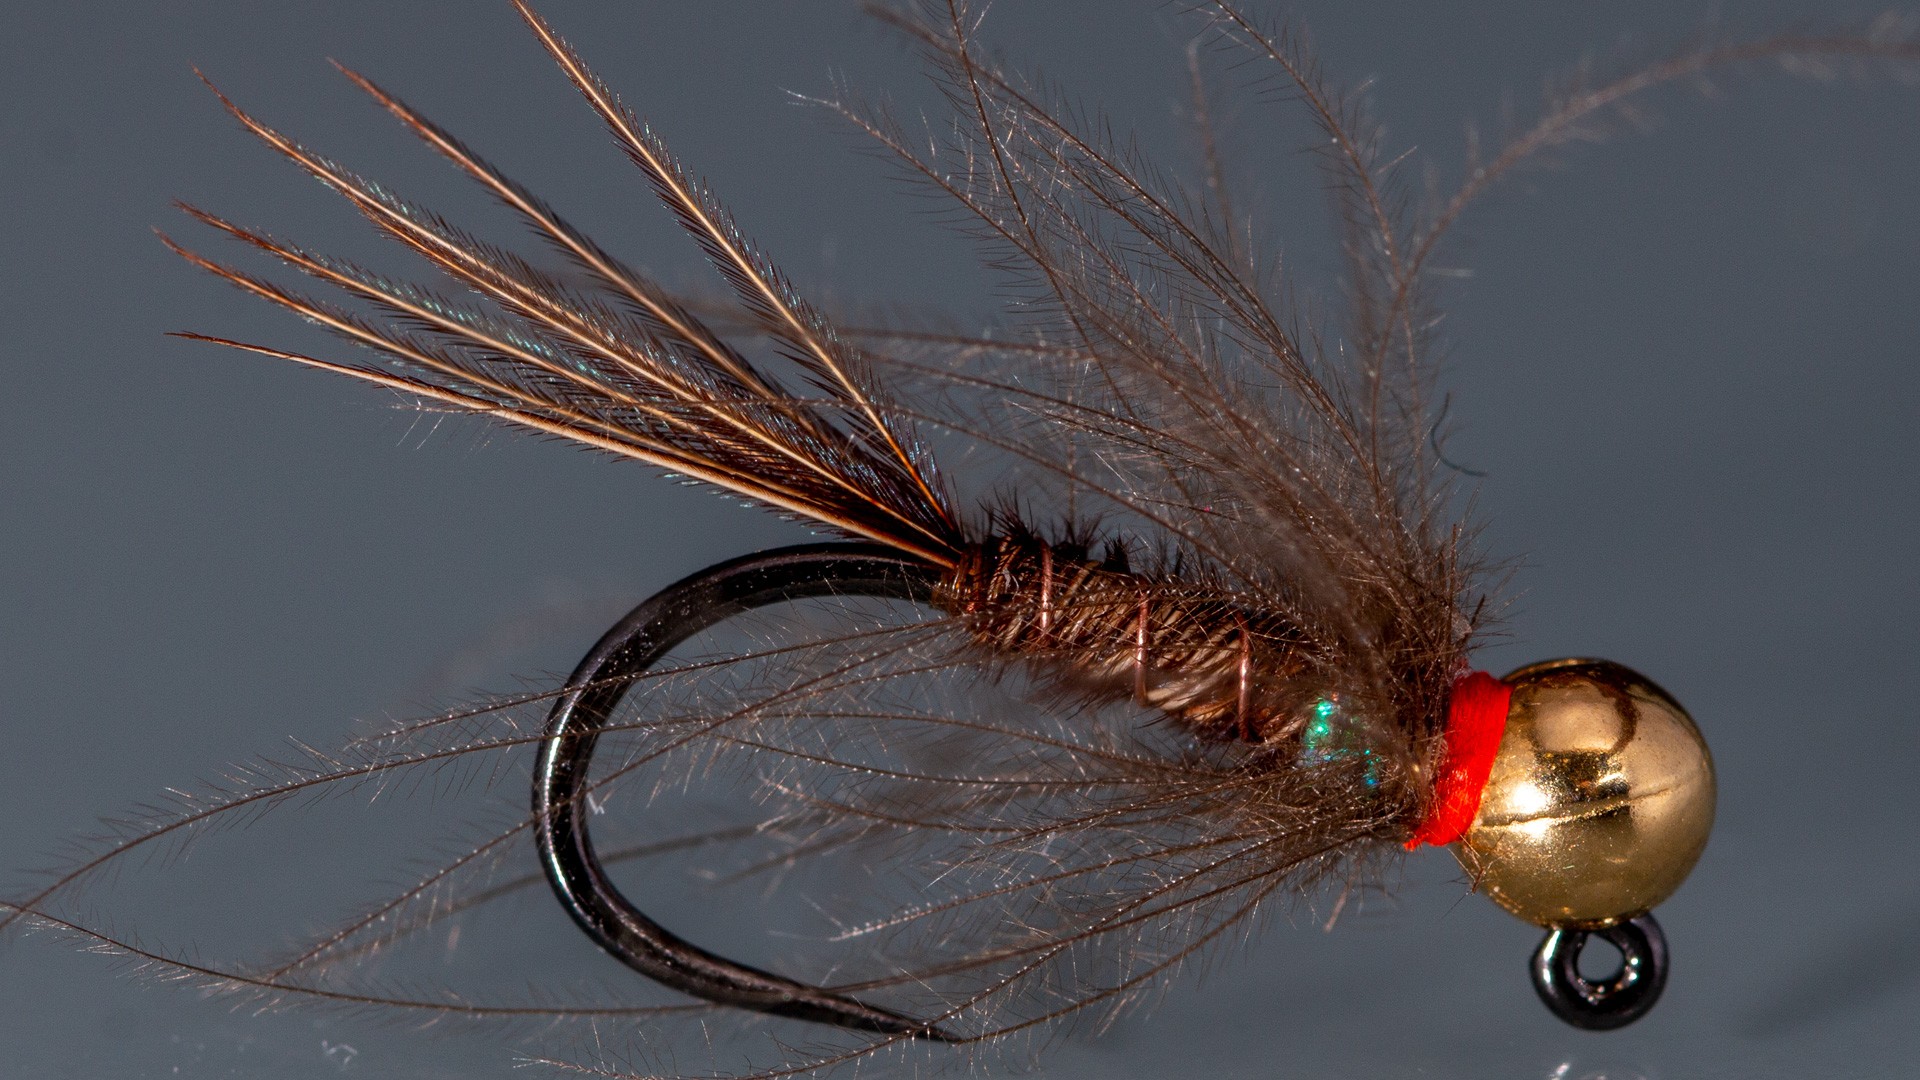 Pheasant tail jig nymph with CdC hackle